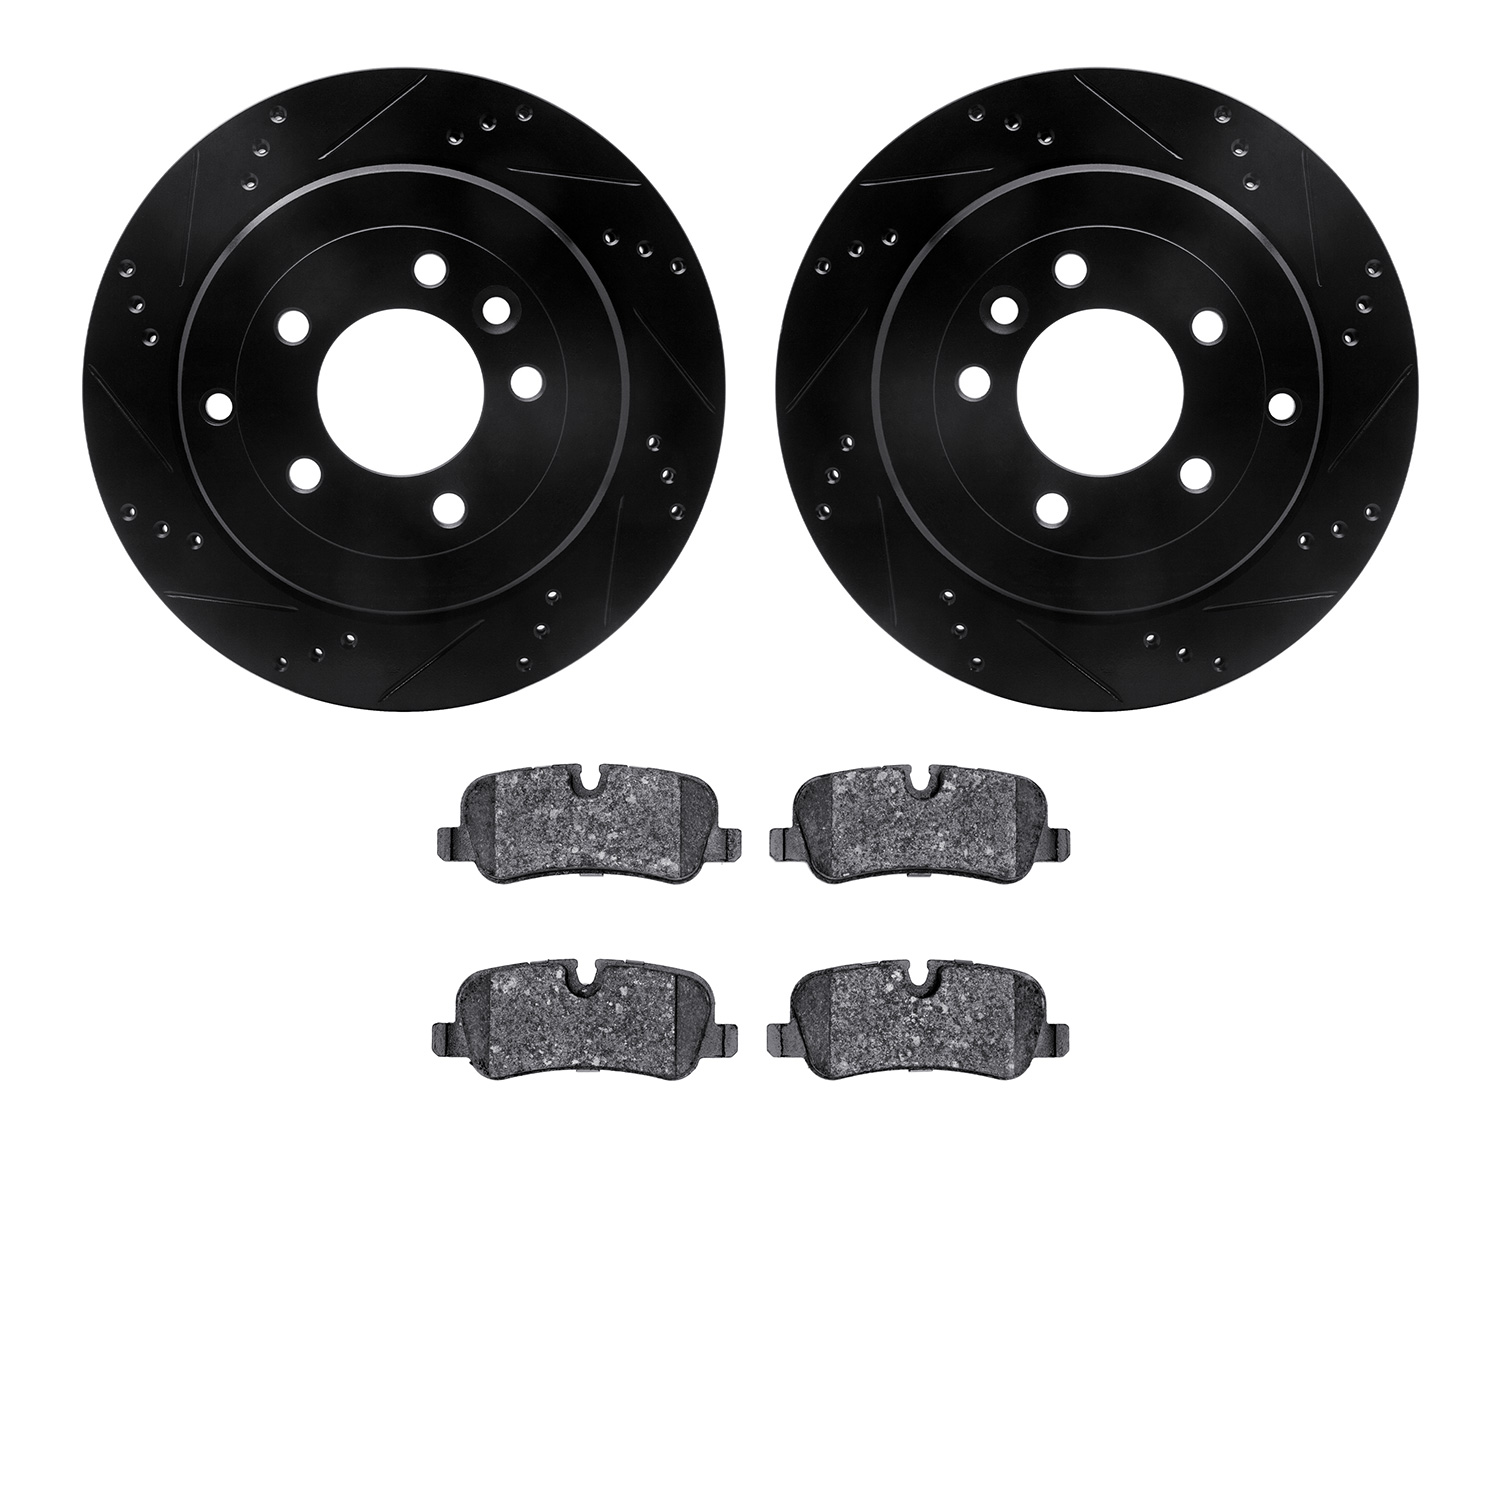 8302-11016 Drilled/Slotted Brake Rotors with 3000-Series Ceramic Brake Pads Kit [Black], 2005-2007 Land Rover, Position: Rear